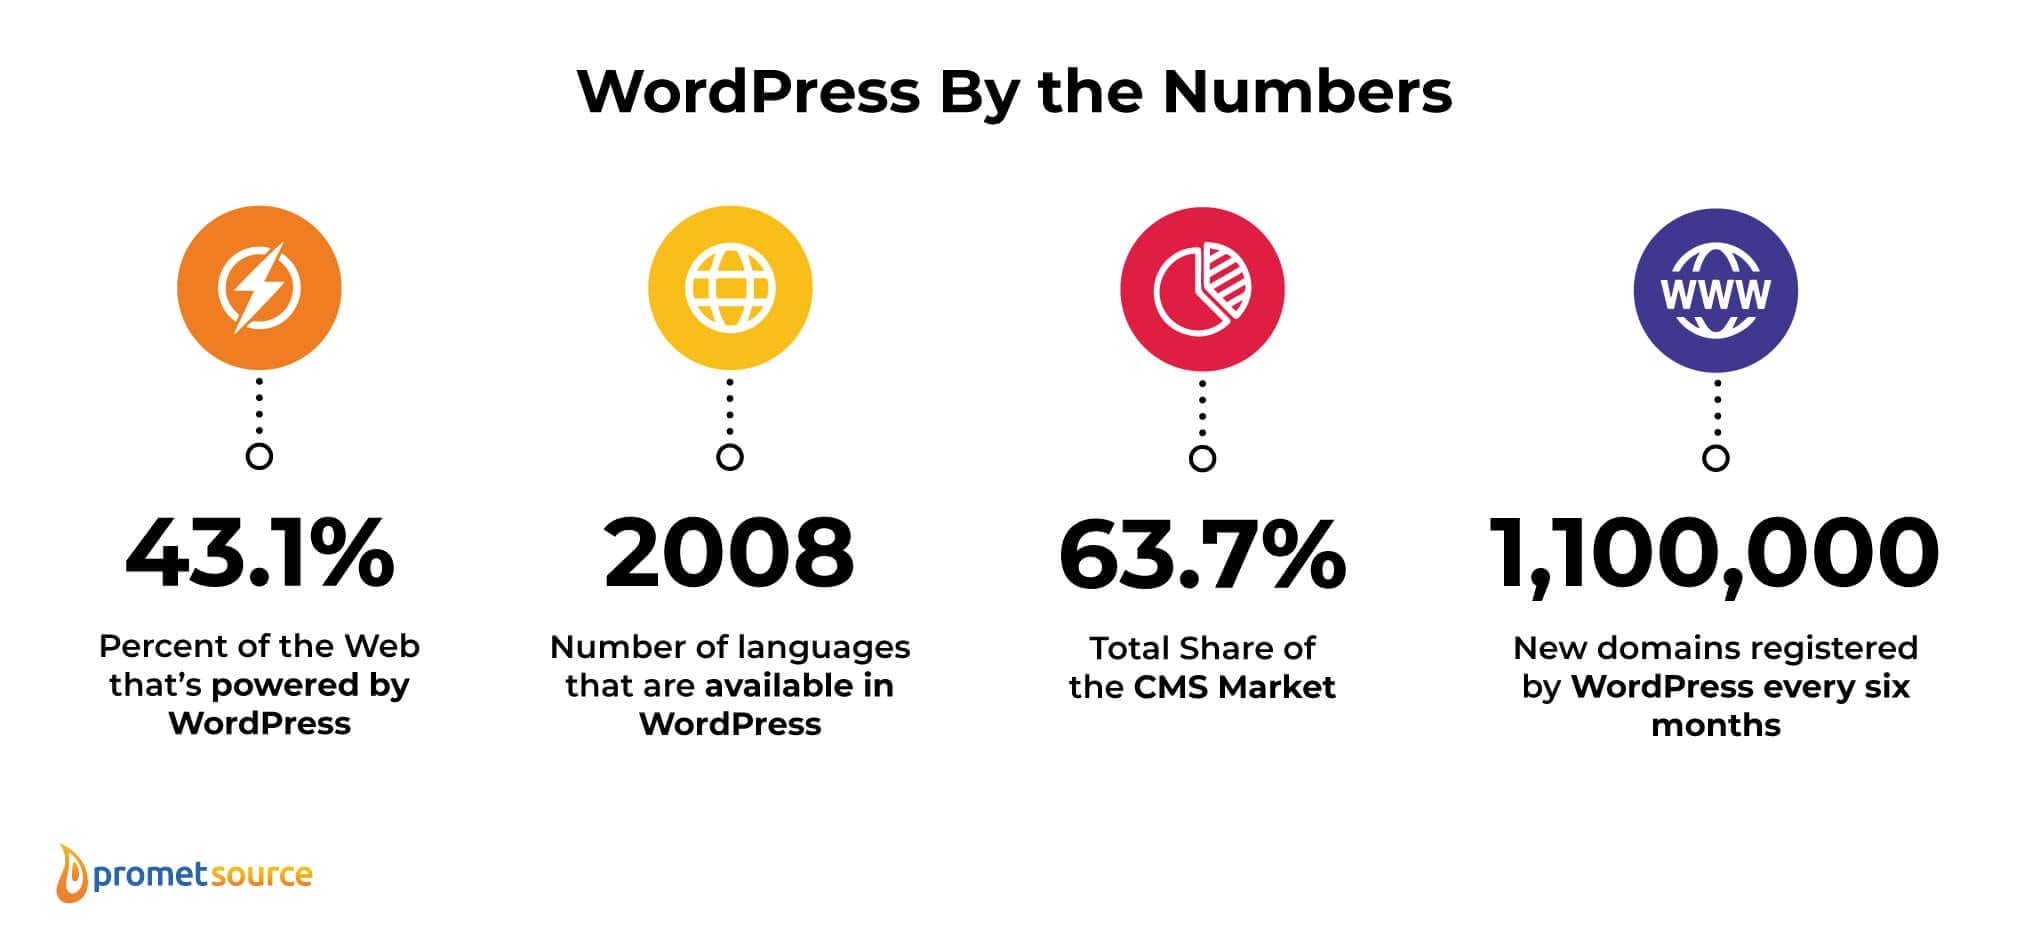 WordPress by the numbers